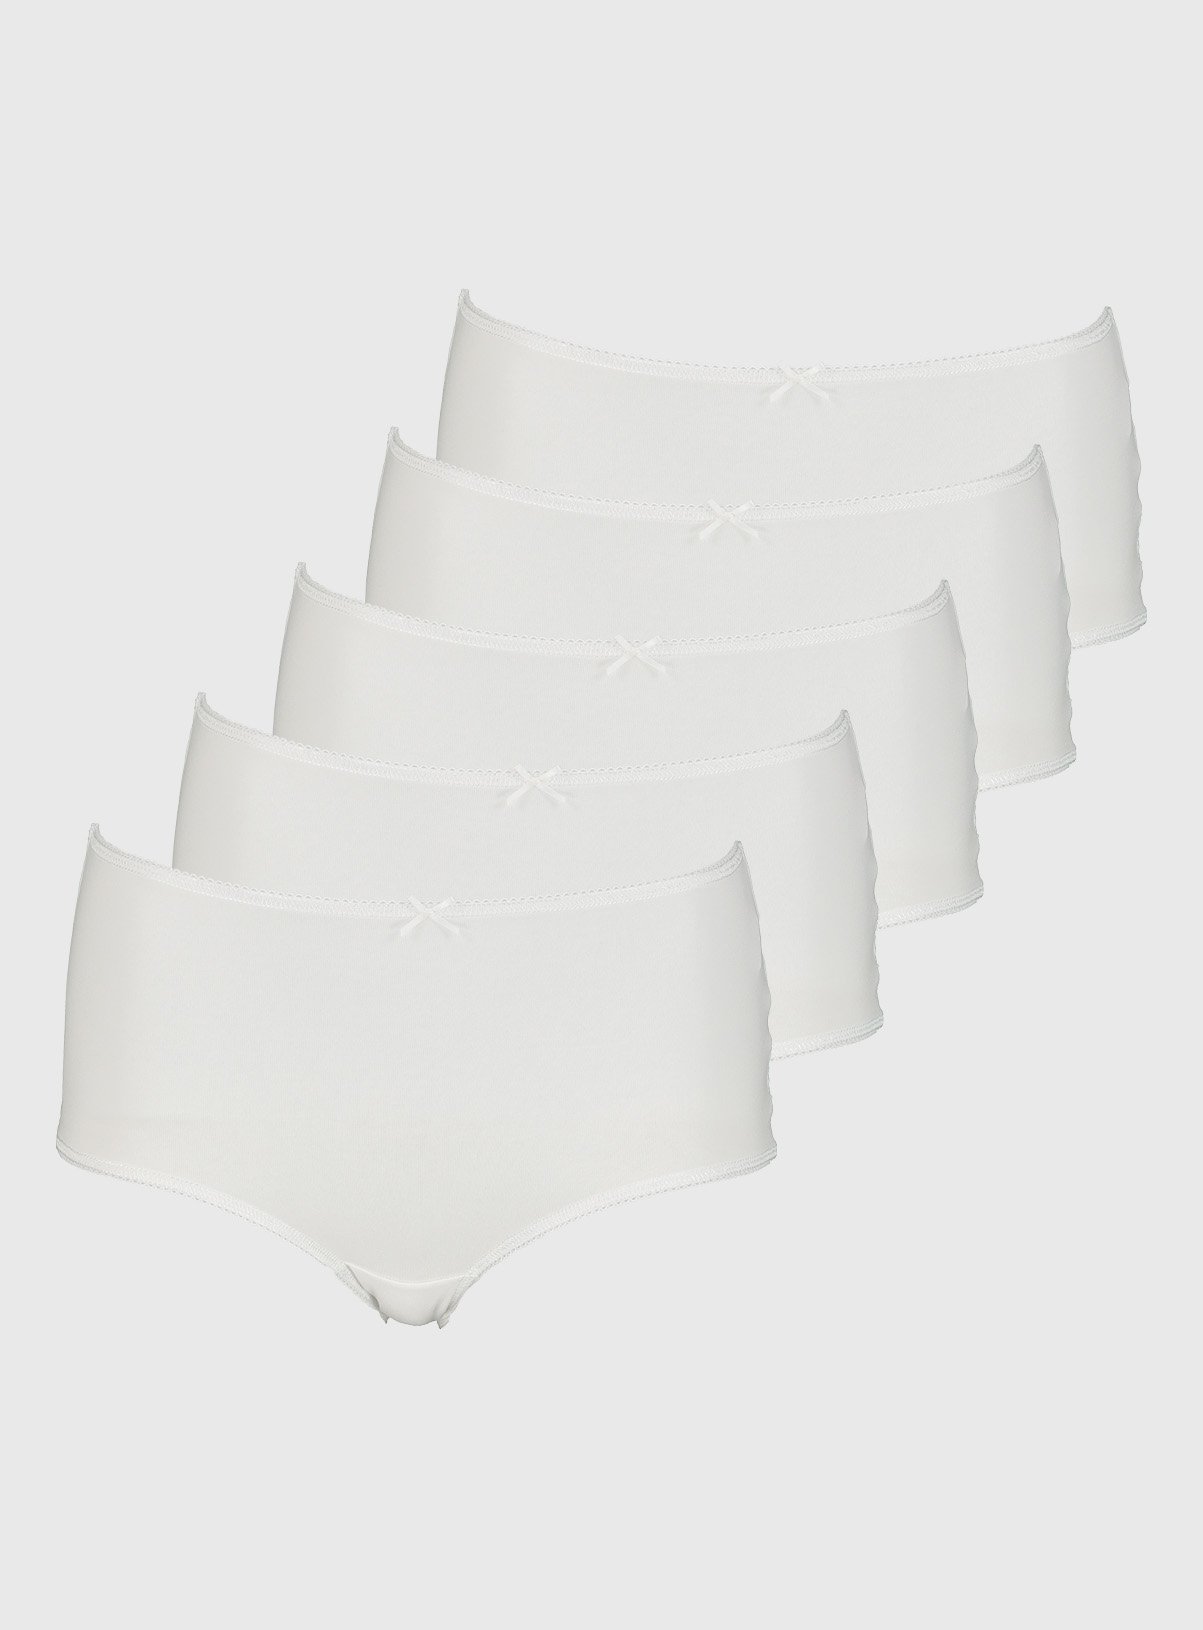 White Comfort Lace Brazilian Knicker 5 Pack Reviews - Updated June 2022